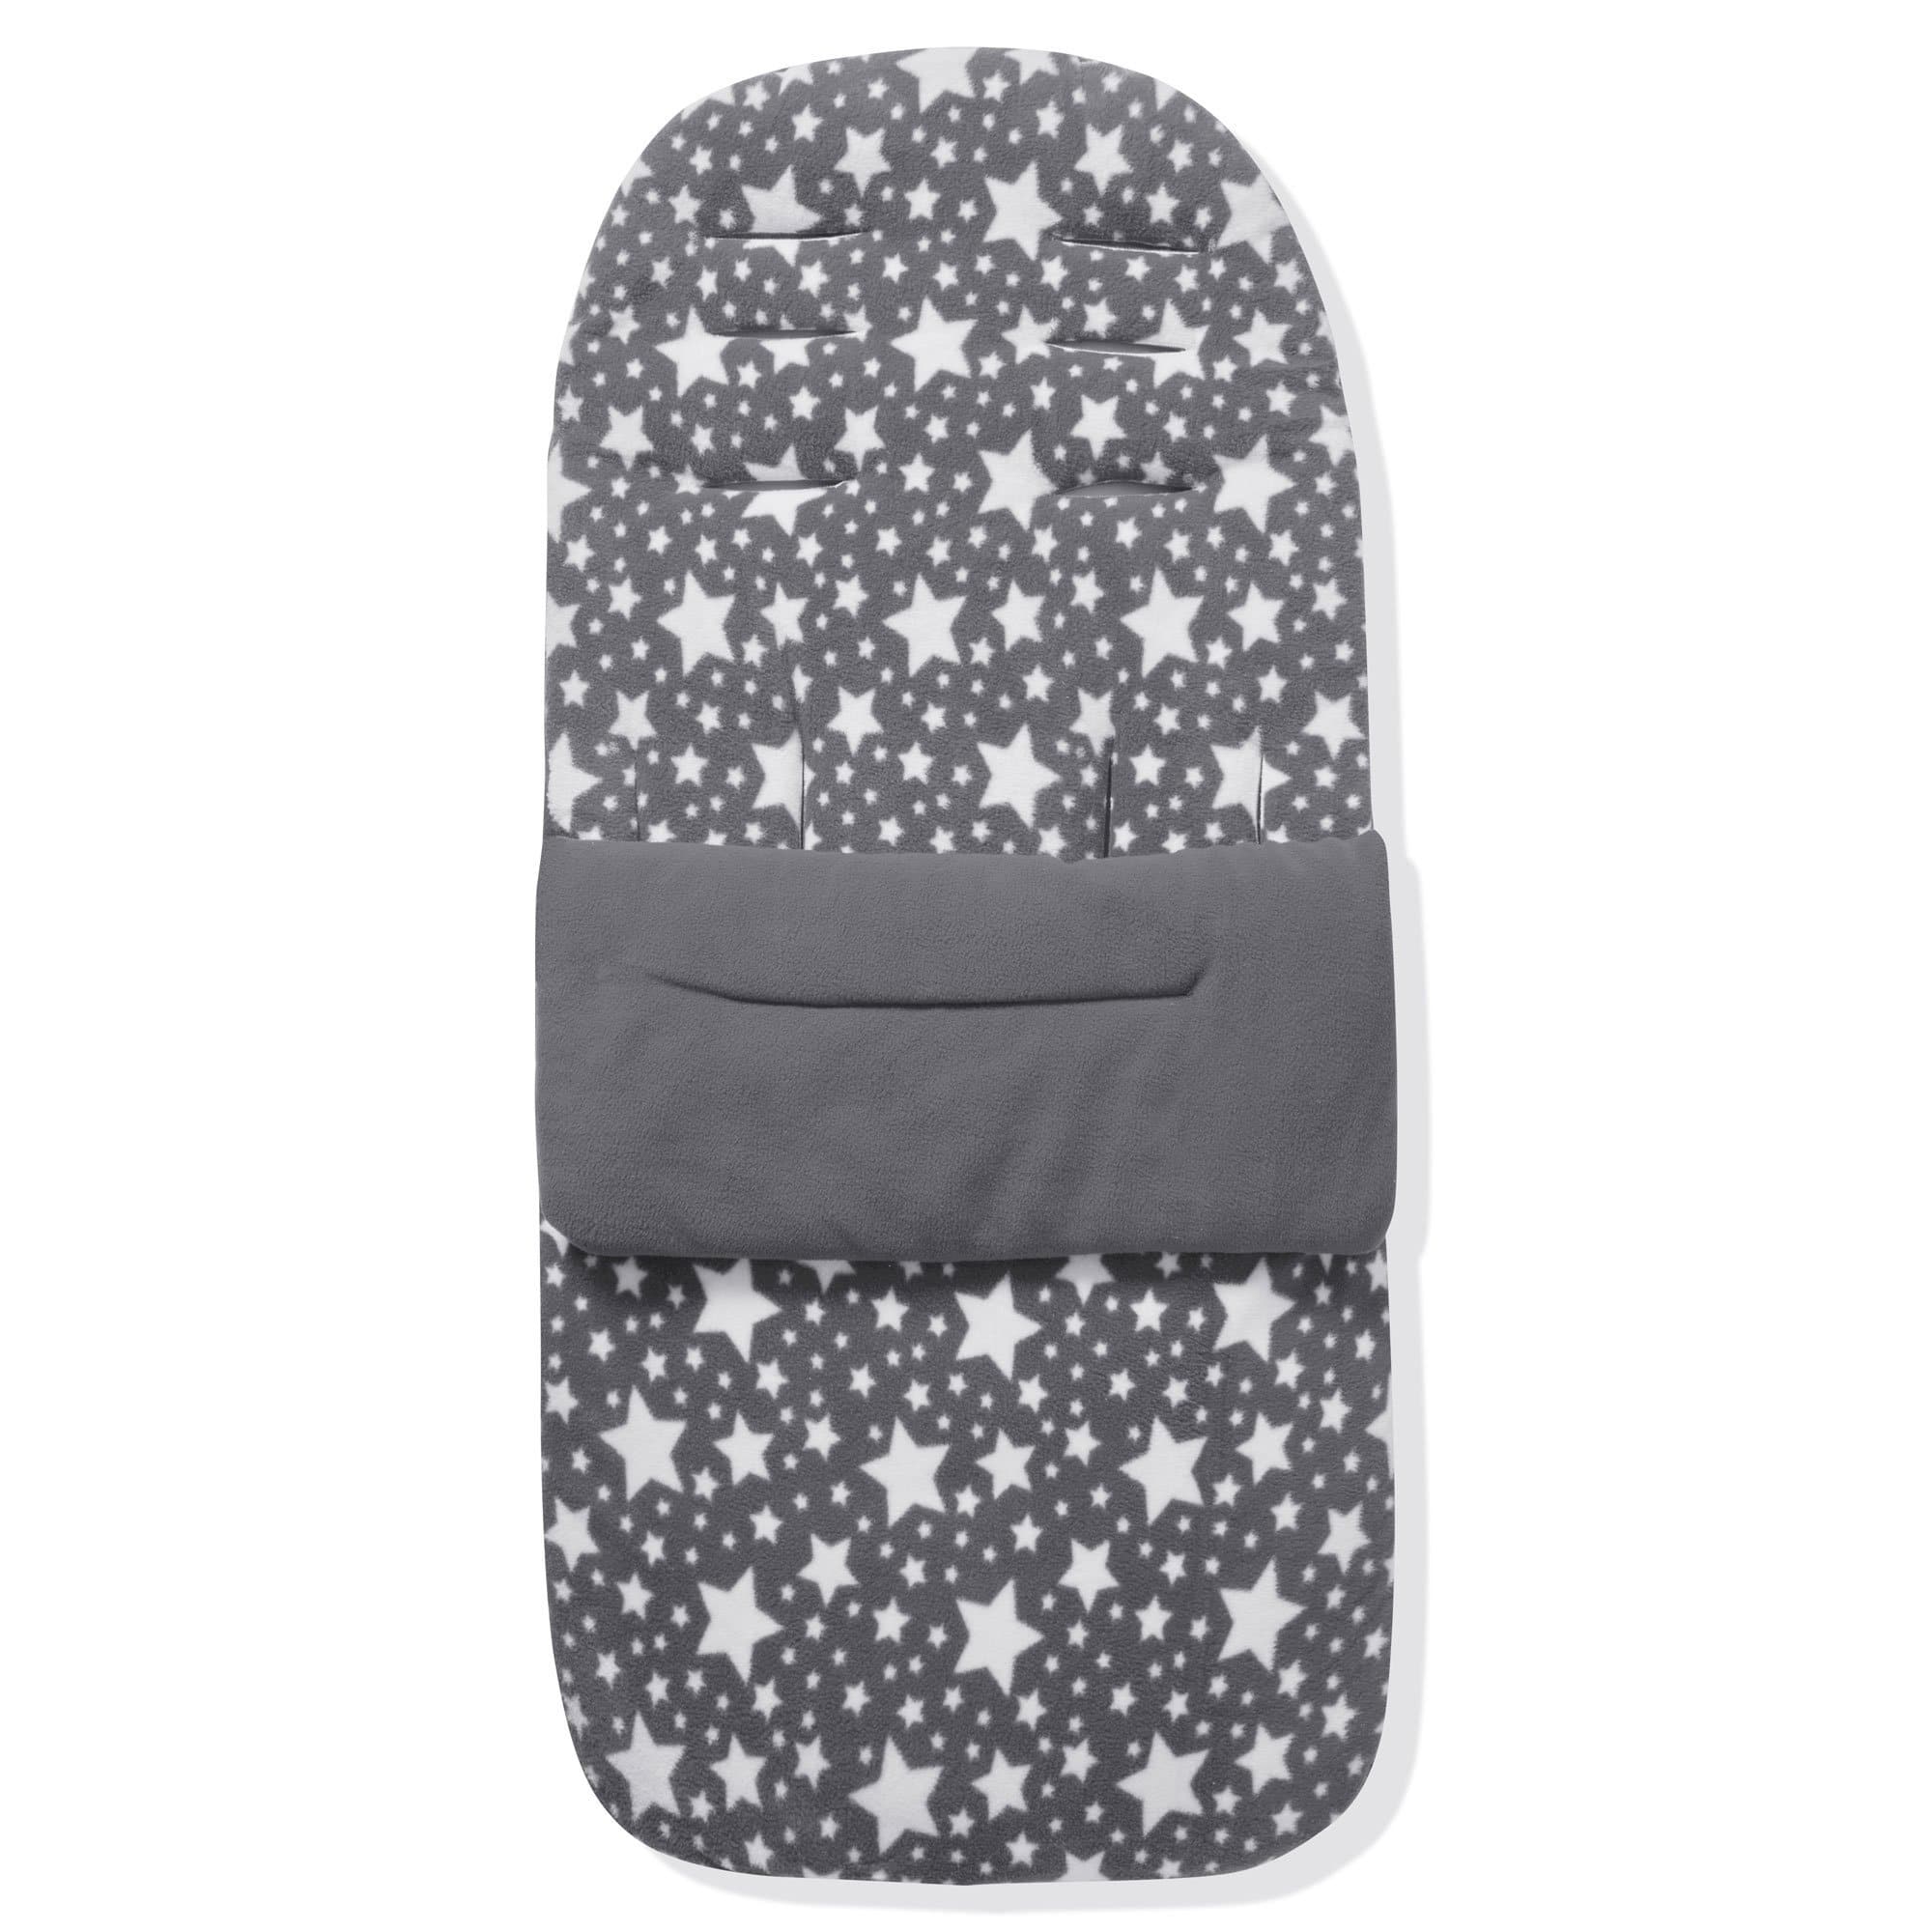 Fleece Footmuff / Cosy Toes Compatible with My Child - Grey Star / Fits All Models | For Your Little One